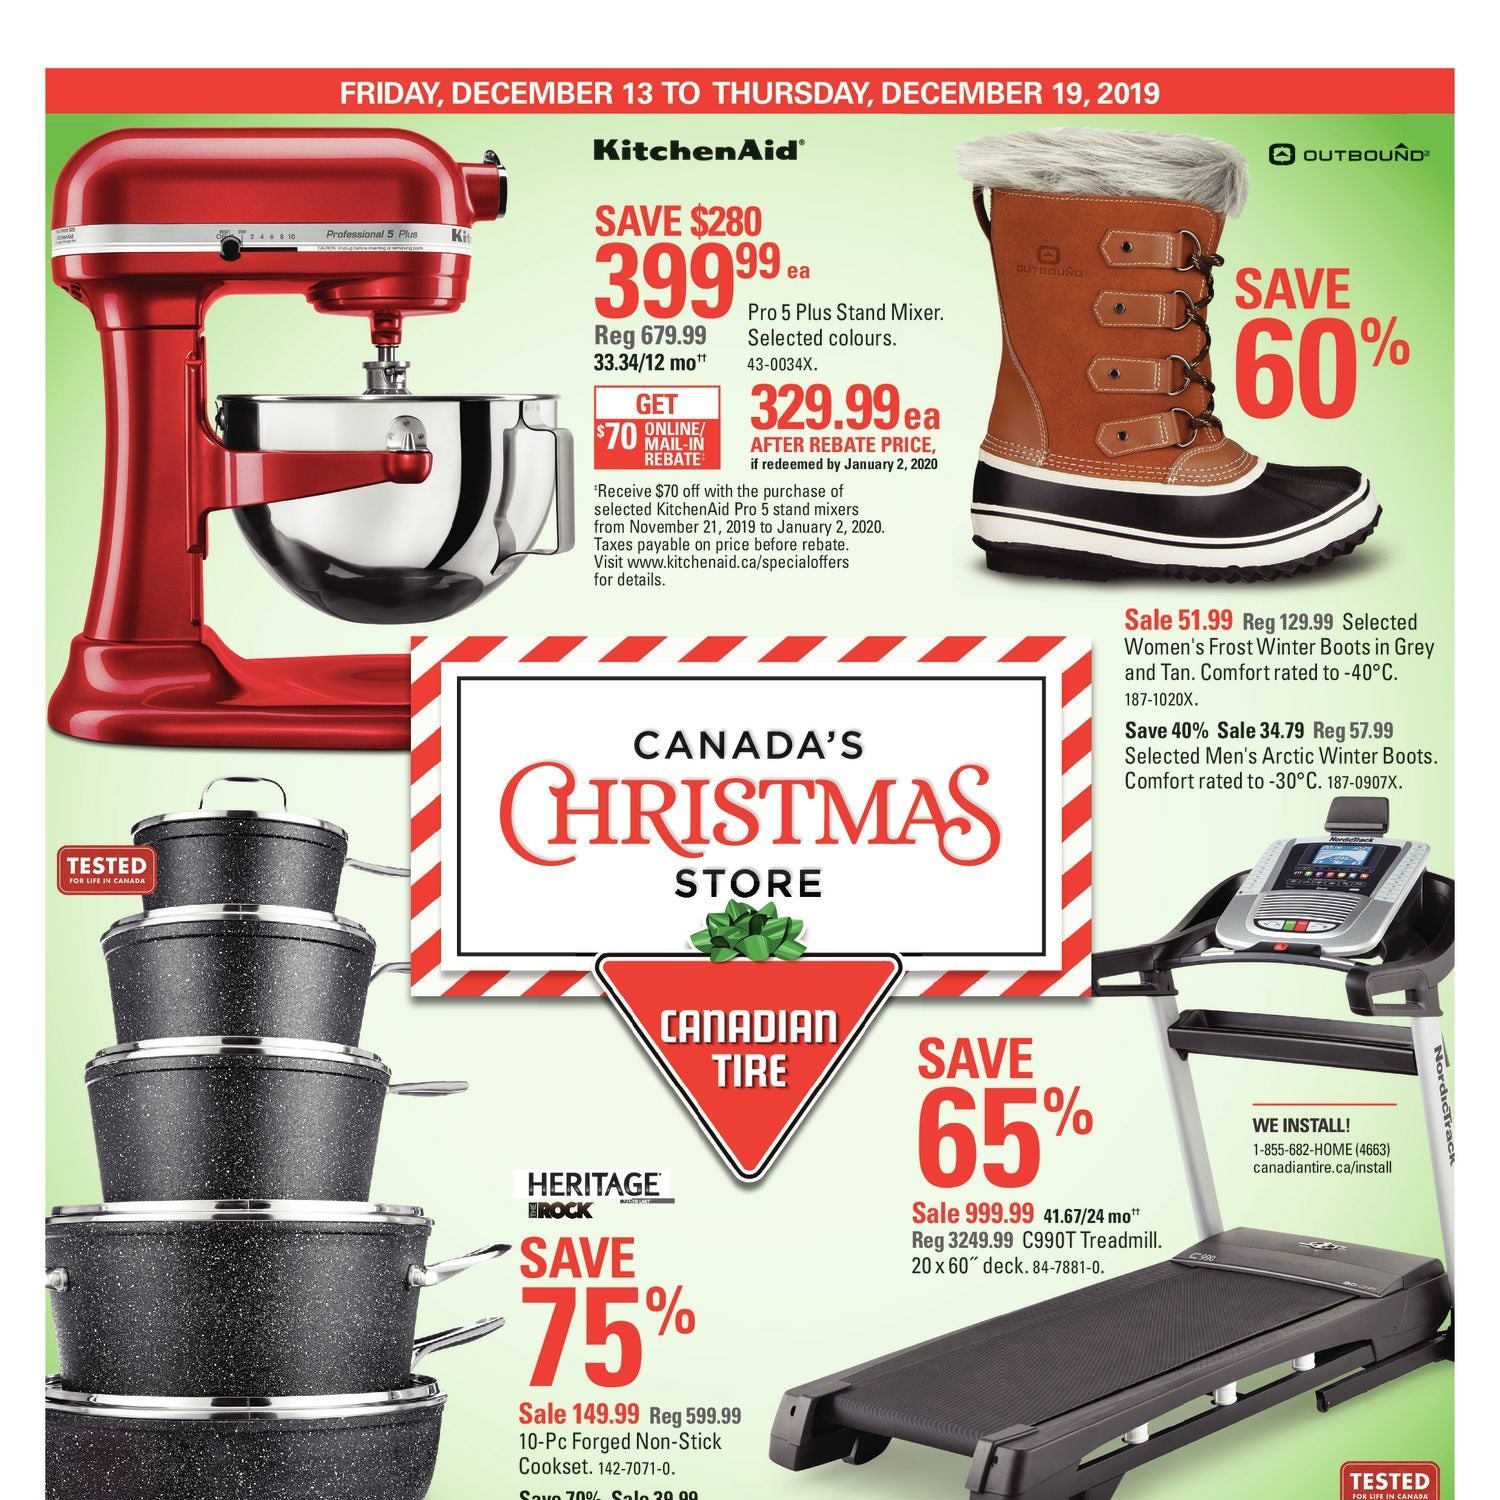 Canadian Tire Weekly Flyer Weekly Canada S Christmas Store